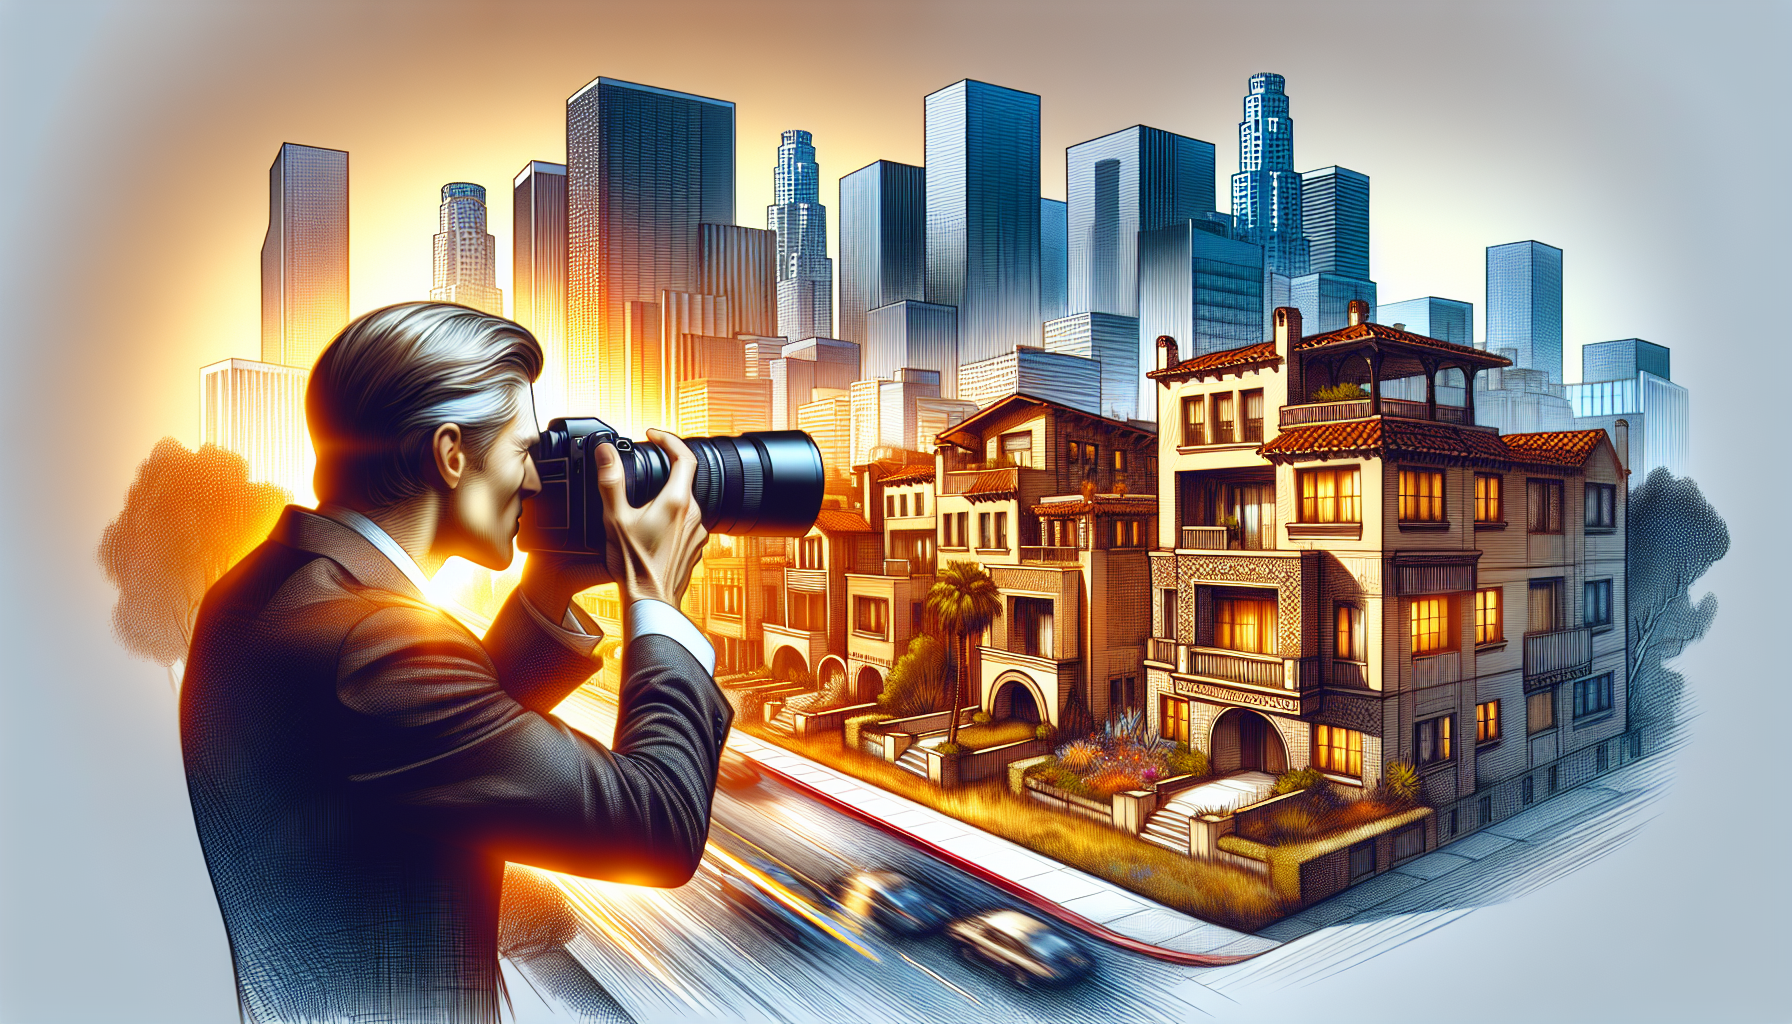 Architectural photographer capturing diverse styles of residential and commercial buildings in Los Angeles